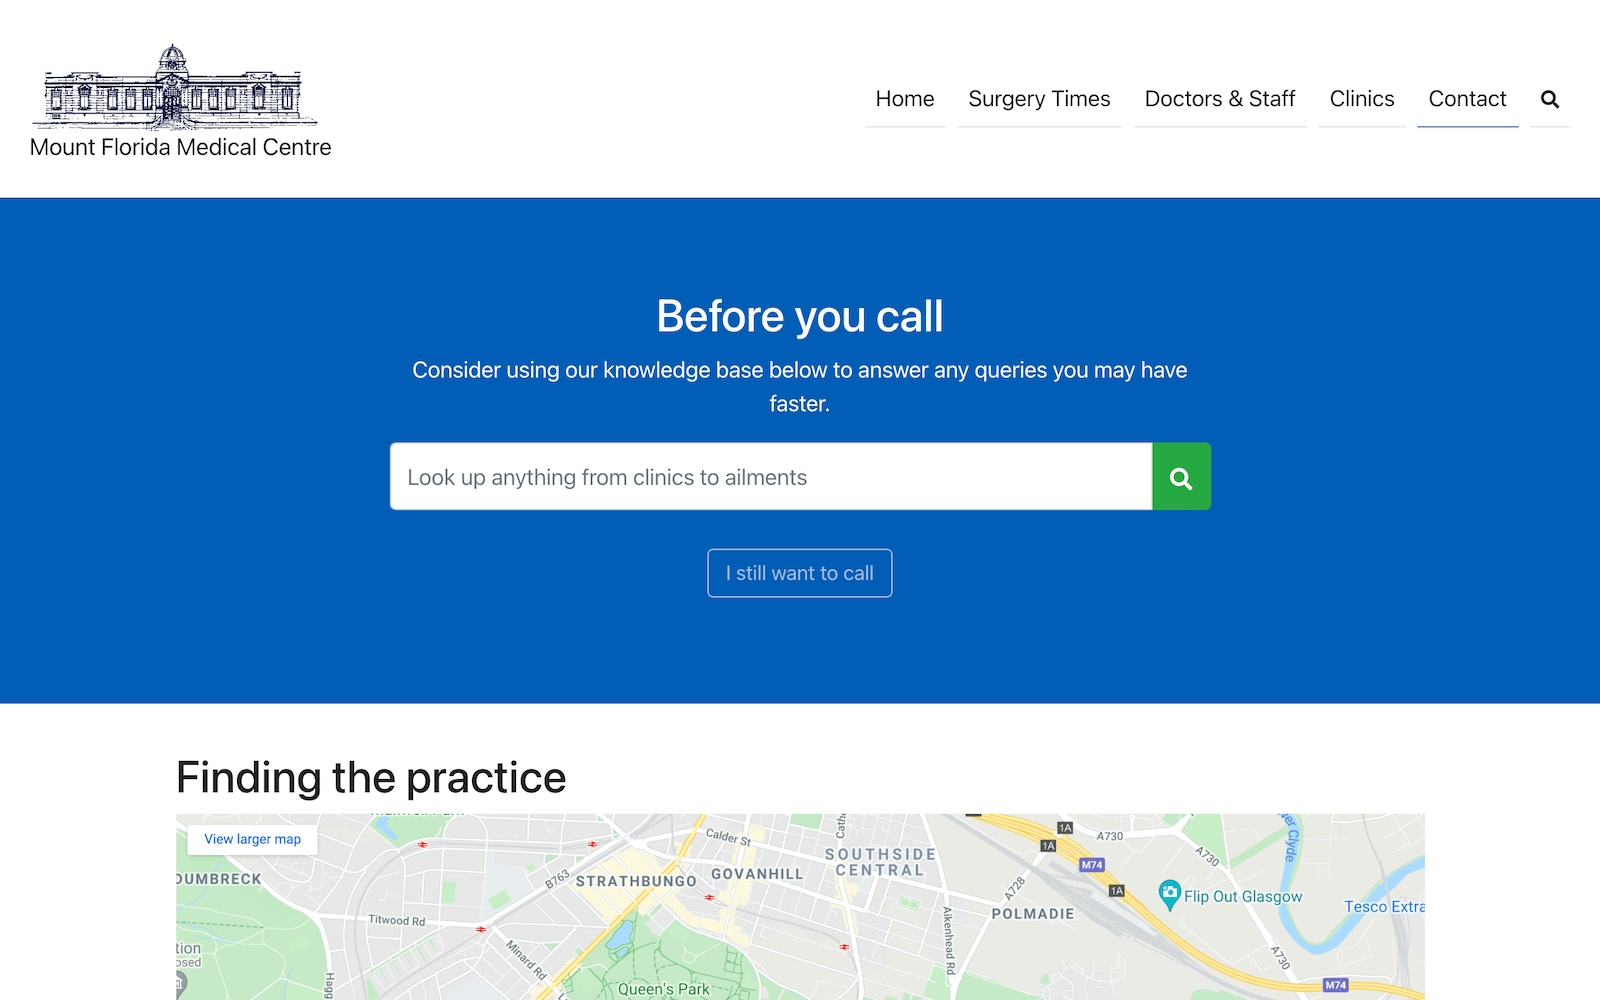 Contact page with signposting to direct users to best resources